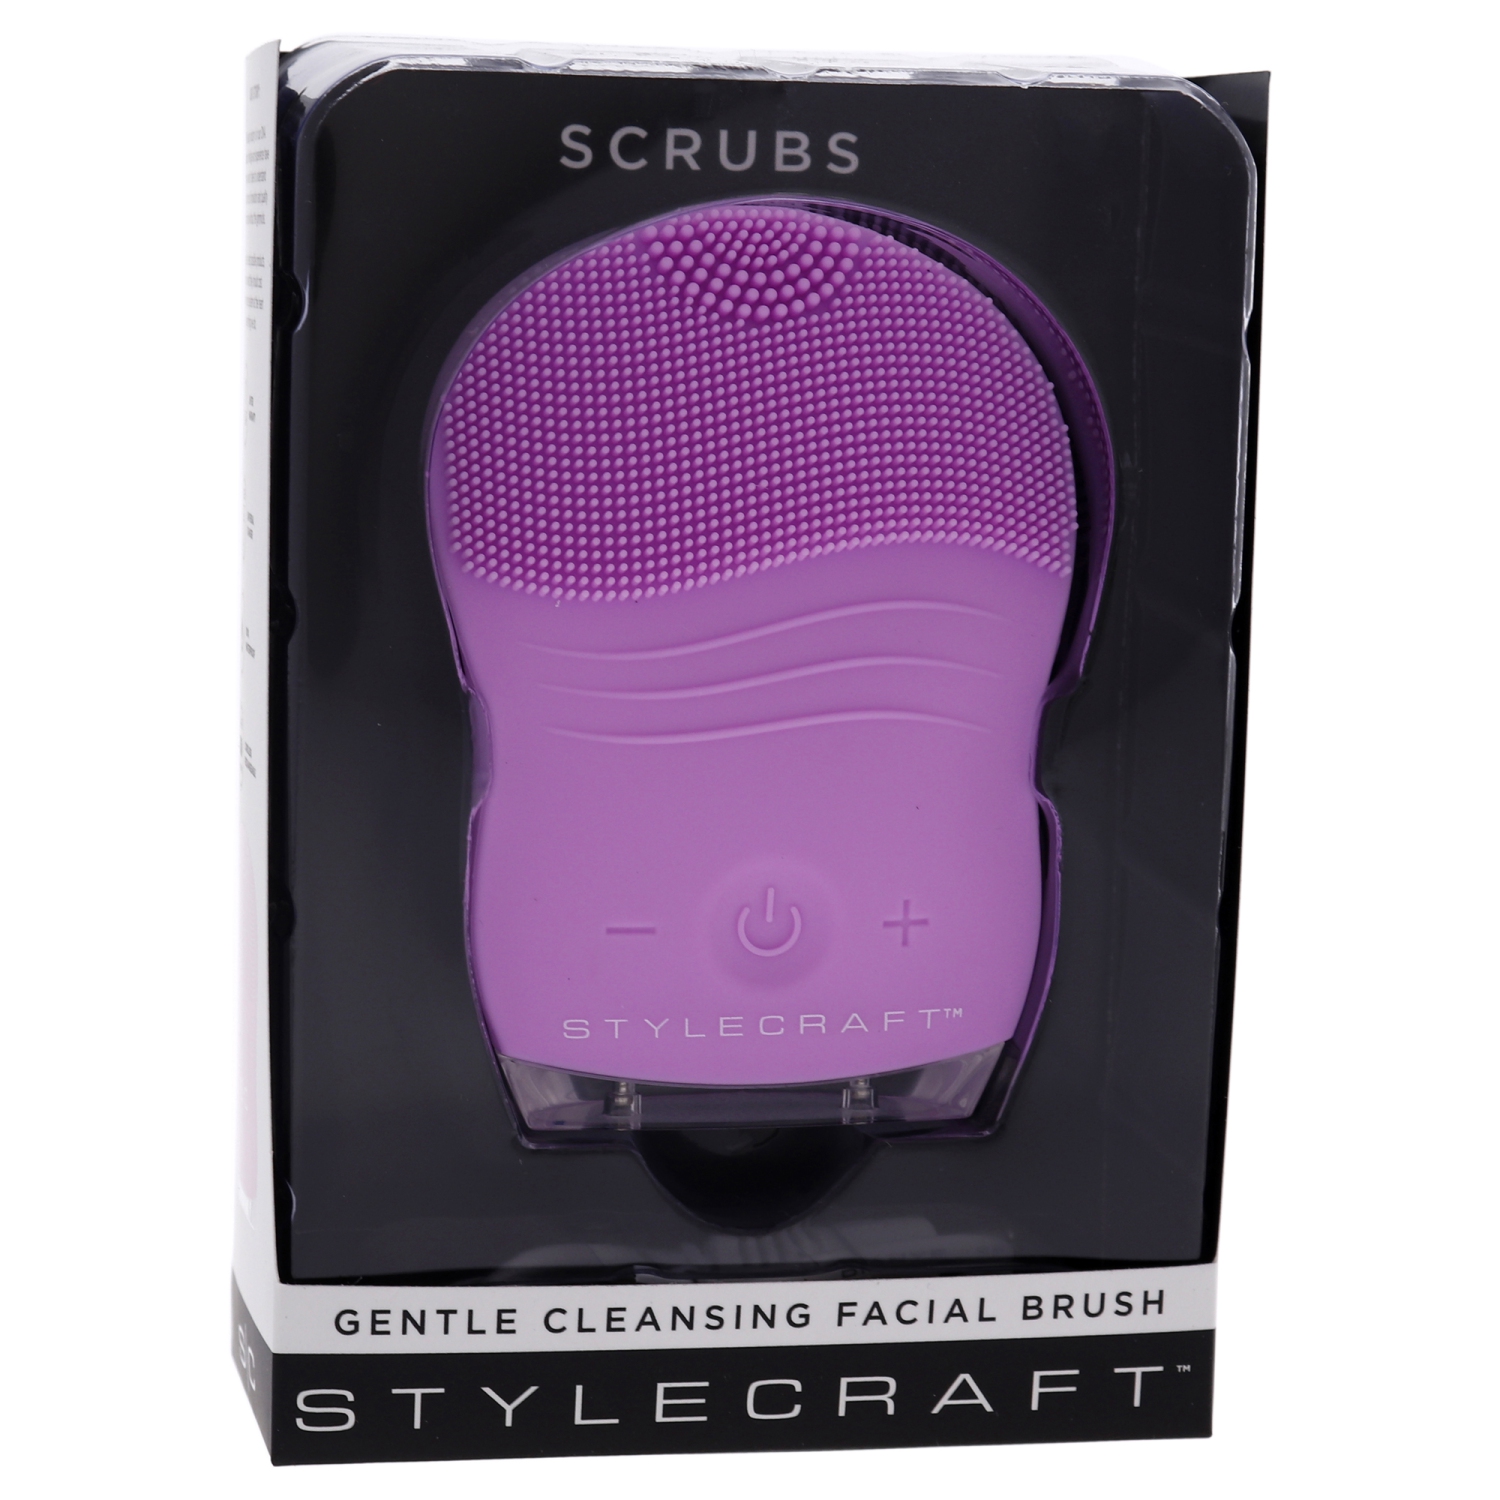 Scrubs Gentle Cleansing Facial Brush - Pink by StyleCraft for Unisex - 1 Pc Brush